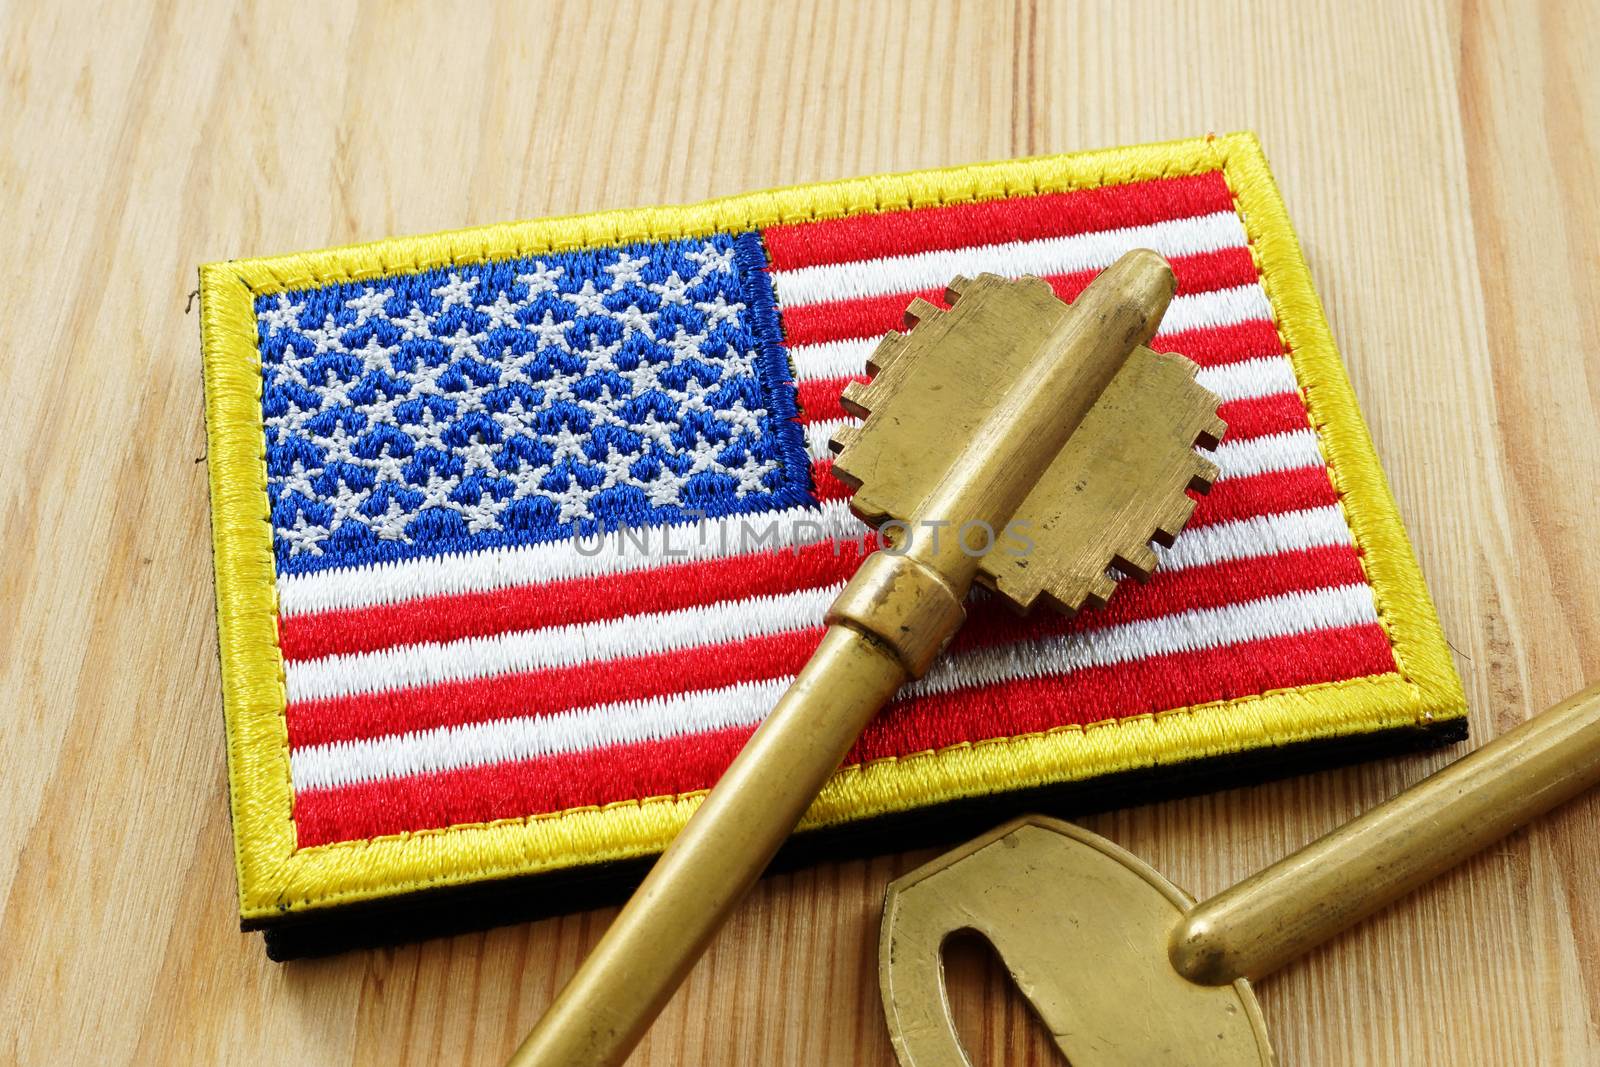 VA Home loan and mortgage. American flag and key. by designer491